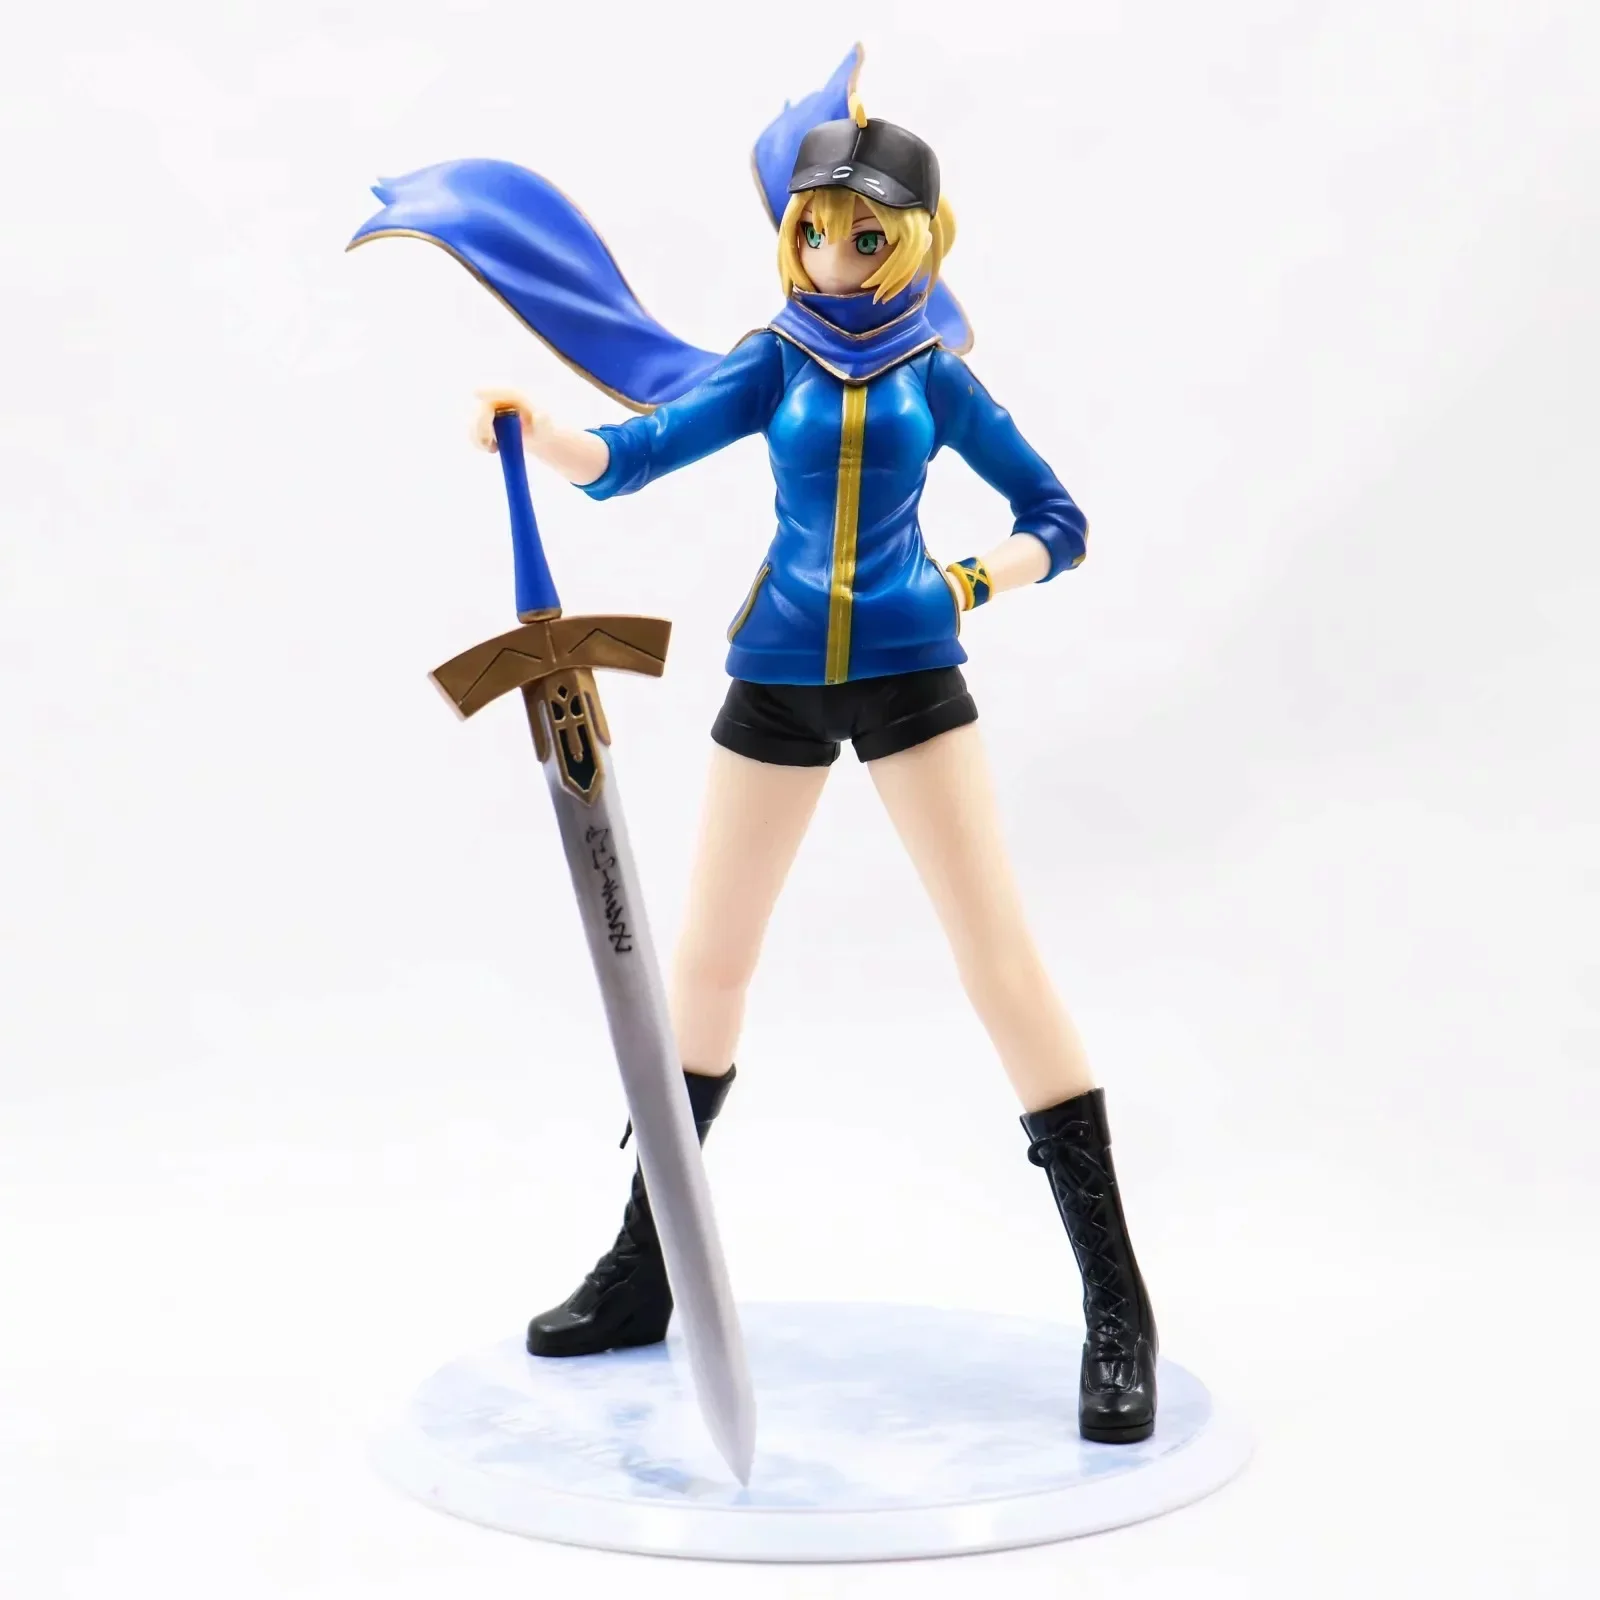 

Joan of Arc Saber Anime Figures Altria Pendragon Tracksuit Girl Model Action Figure PVC Toy Holiday Gifts Cake Decoration